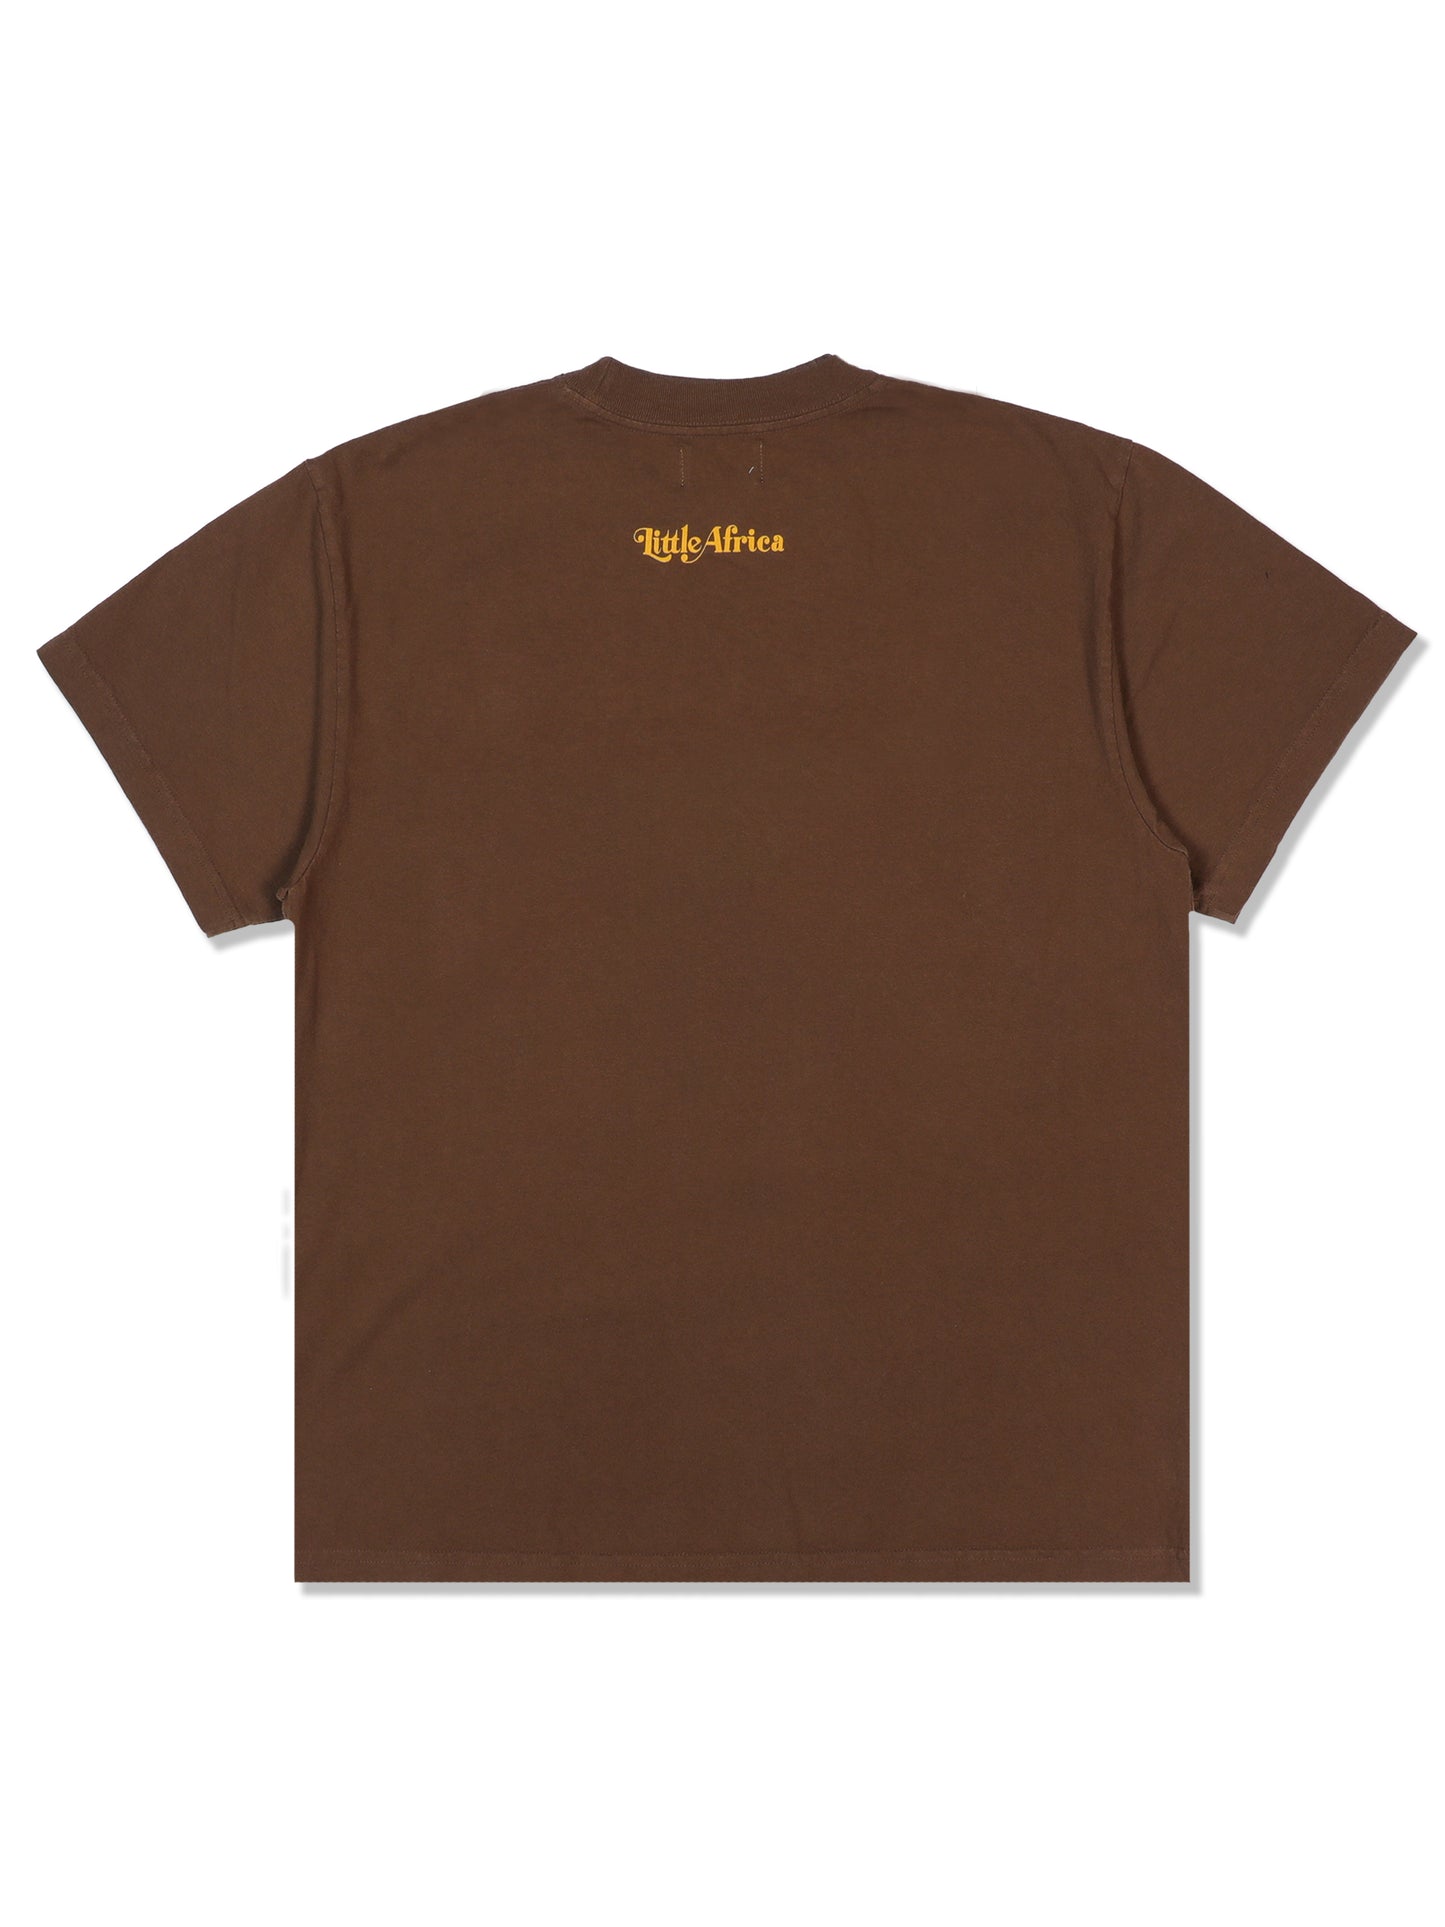 LITTLE AFRICA "Different Strokes Tee" (Vintage Brown)